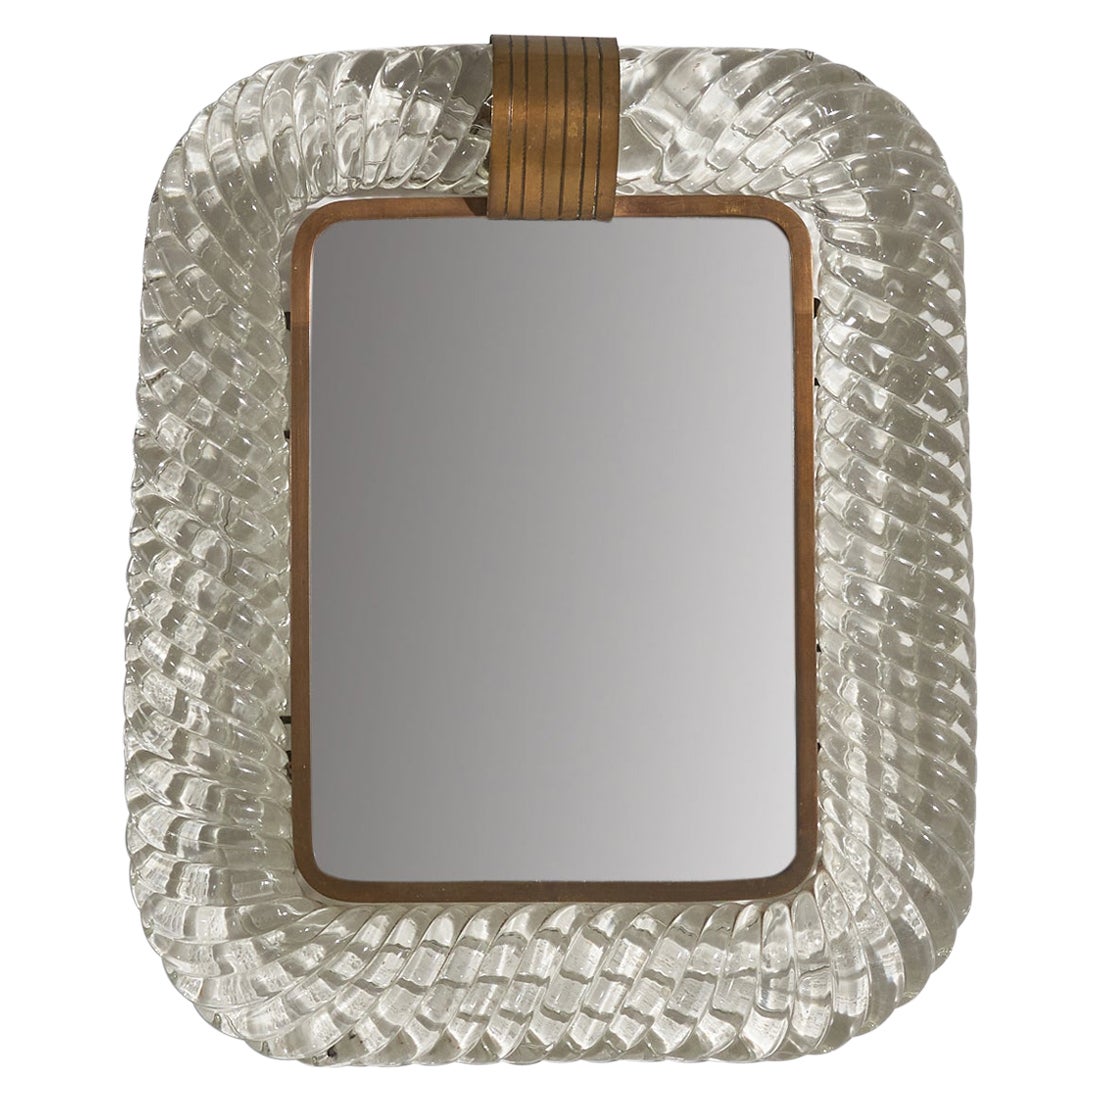 Barovier & Toso, Wall Mirror, Brass, Murano Glass, Mirror Glass, Italy, 1940s For Sale